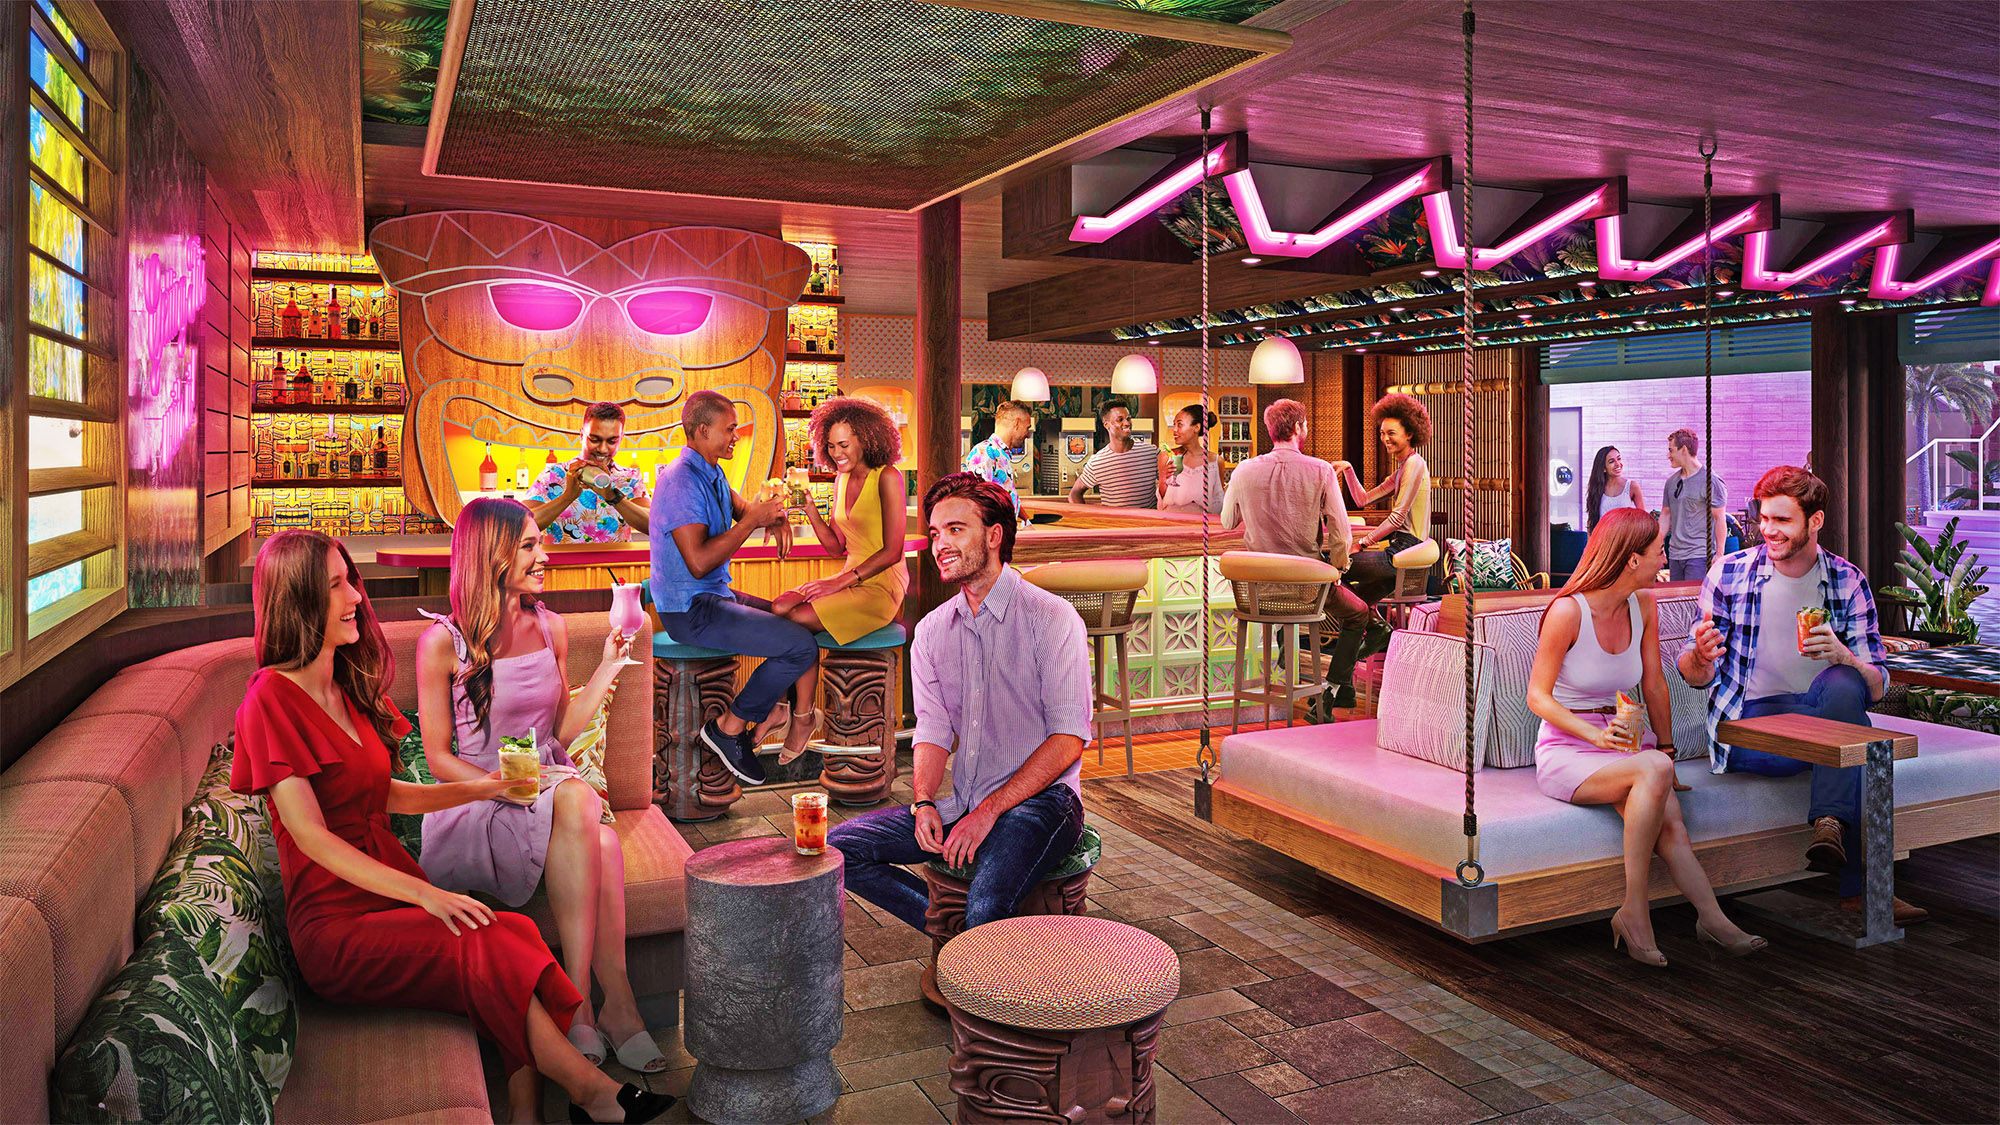 Royal Caribbean describes the Pesky Parrot as a Caribbean tiki bar serving fruit-based cocktails and frozen drinks.